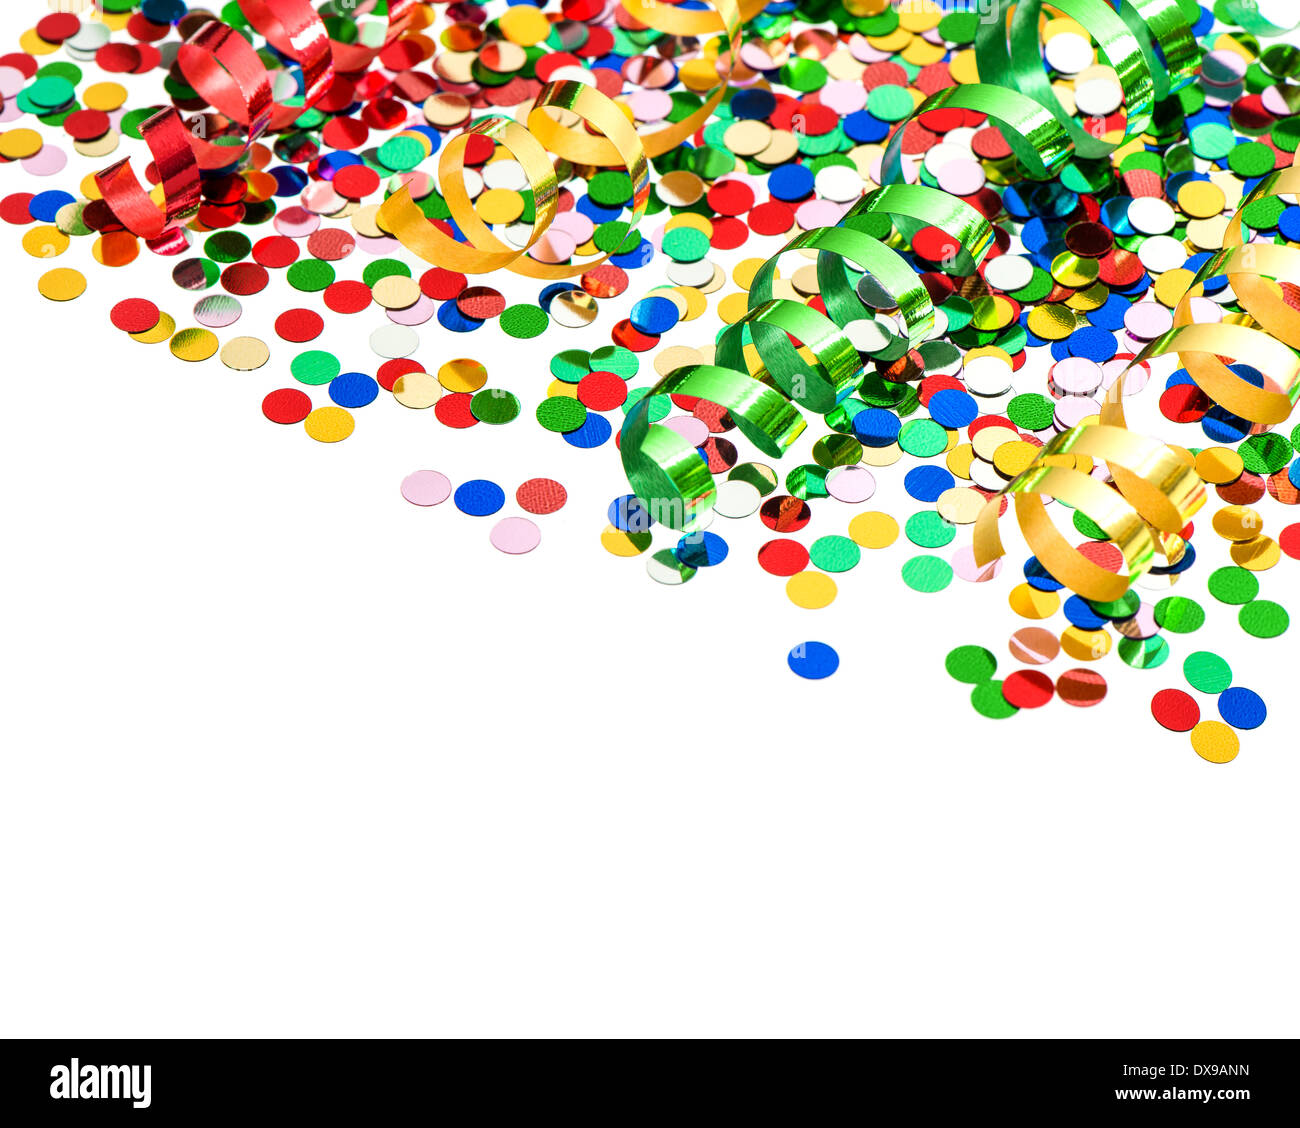 colorful party decoration with confetti and shiny streamer over white background Stock Photo